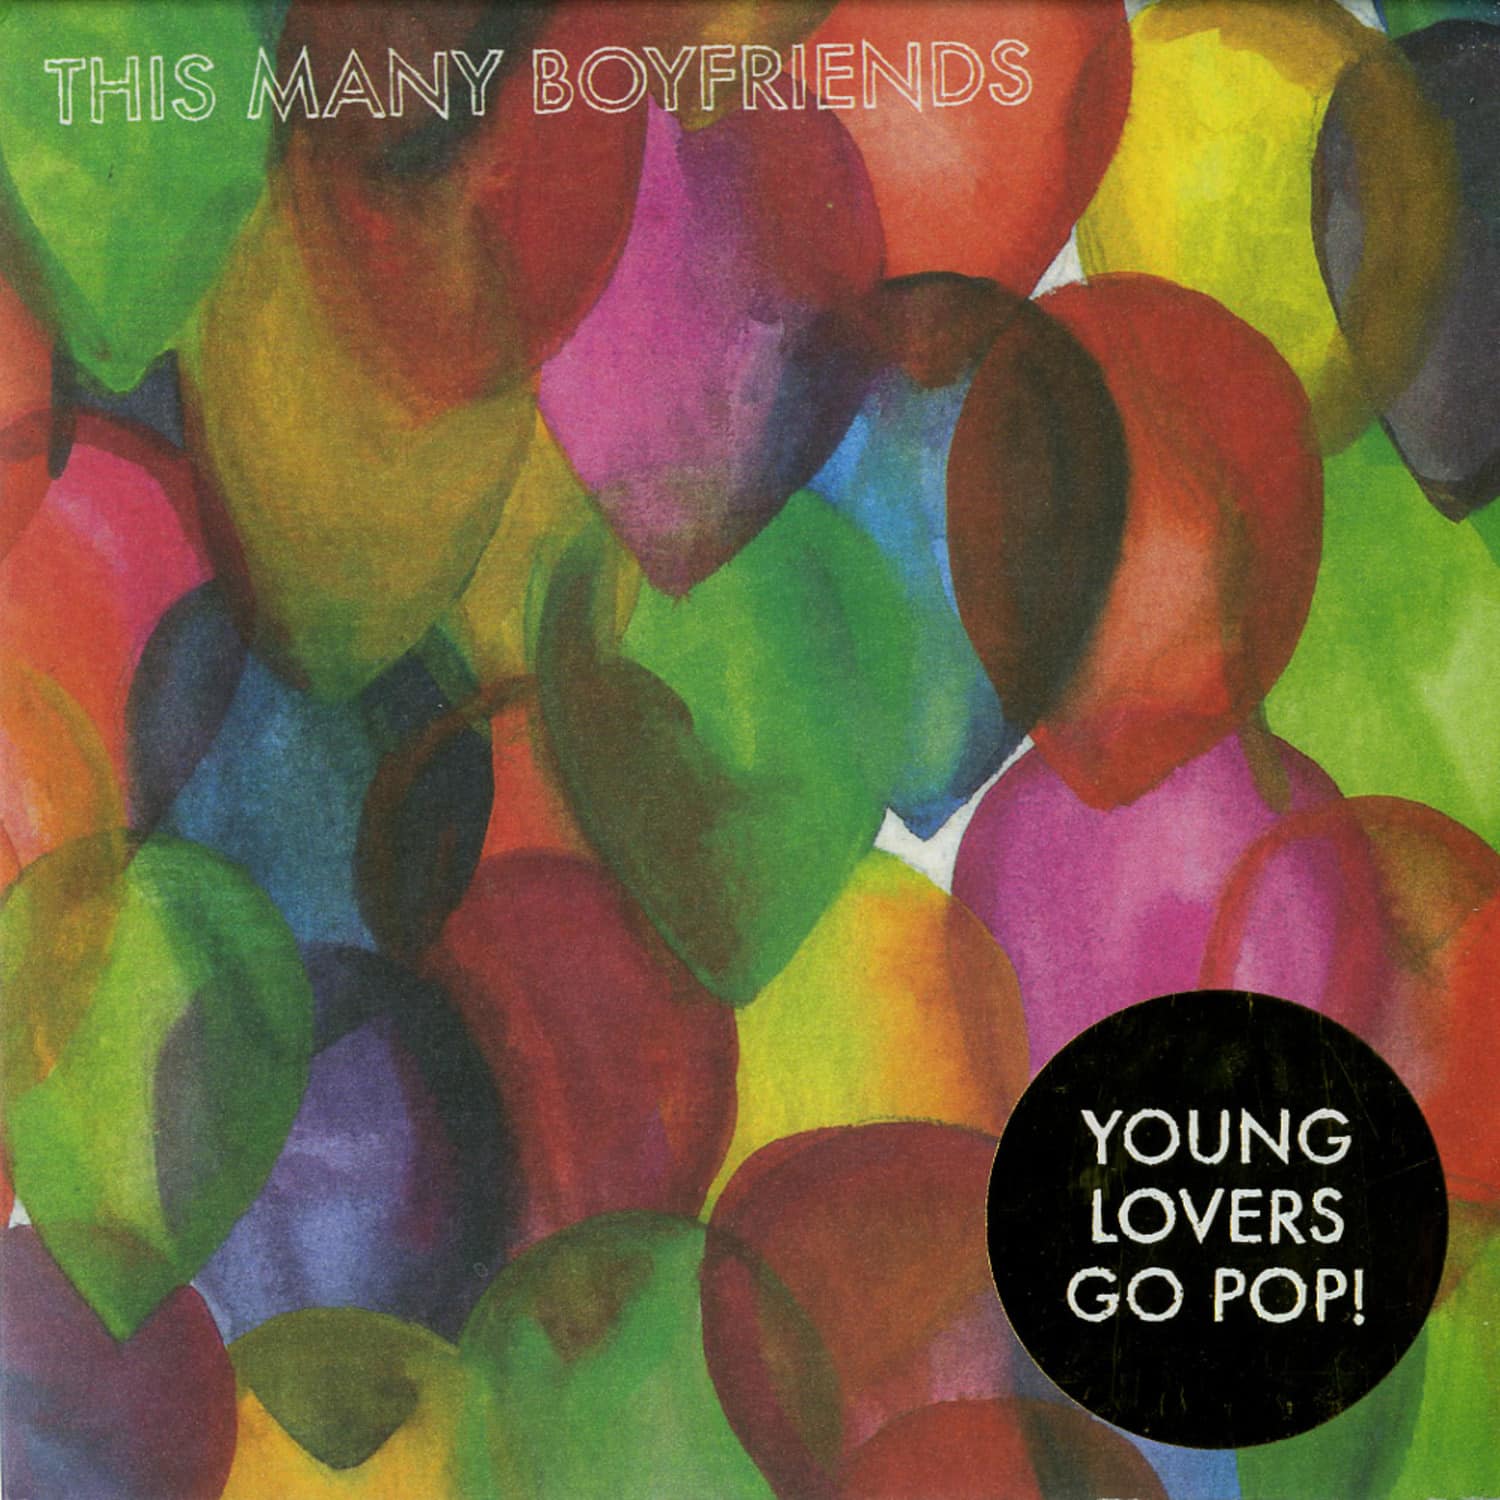 This Many Boyfriends - YOUNG LOVERS GO POP! 